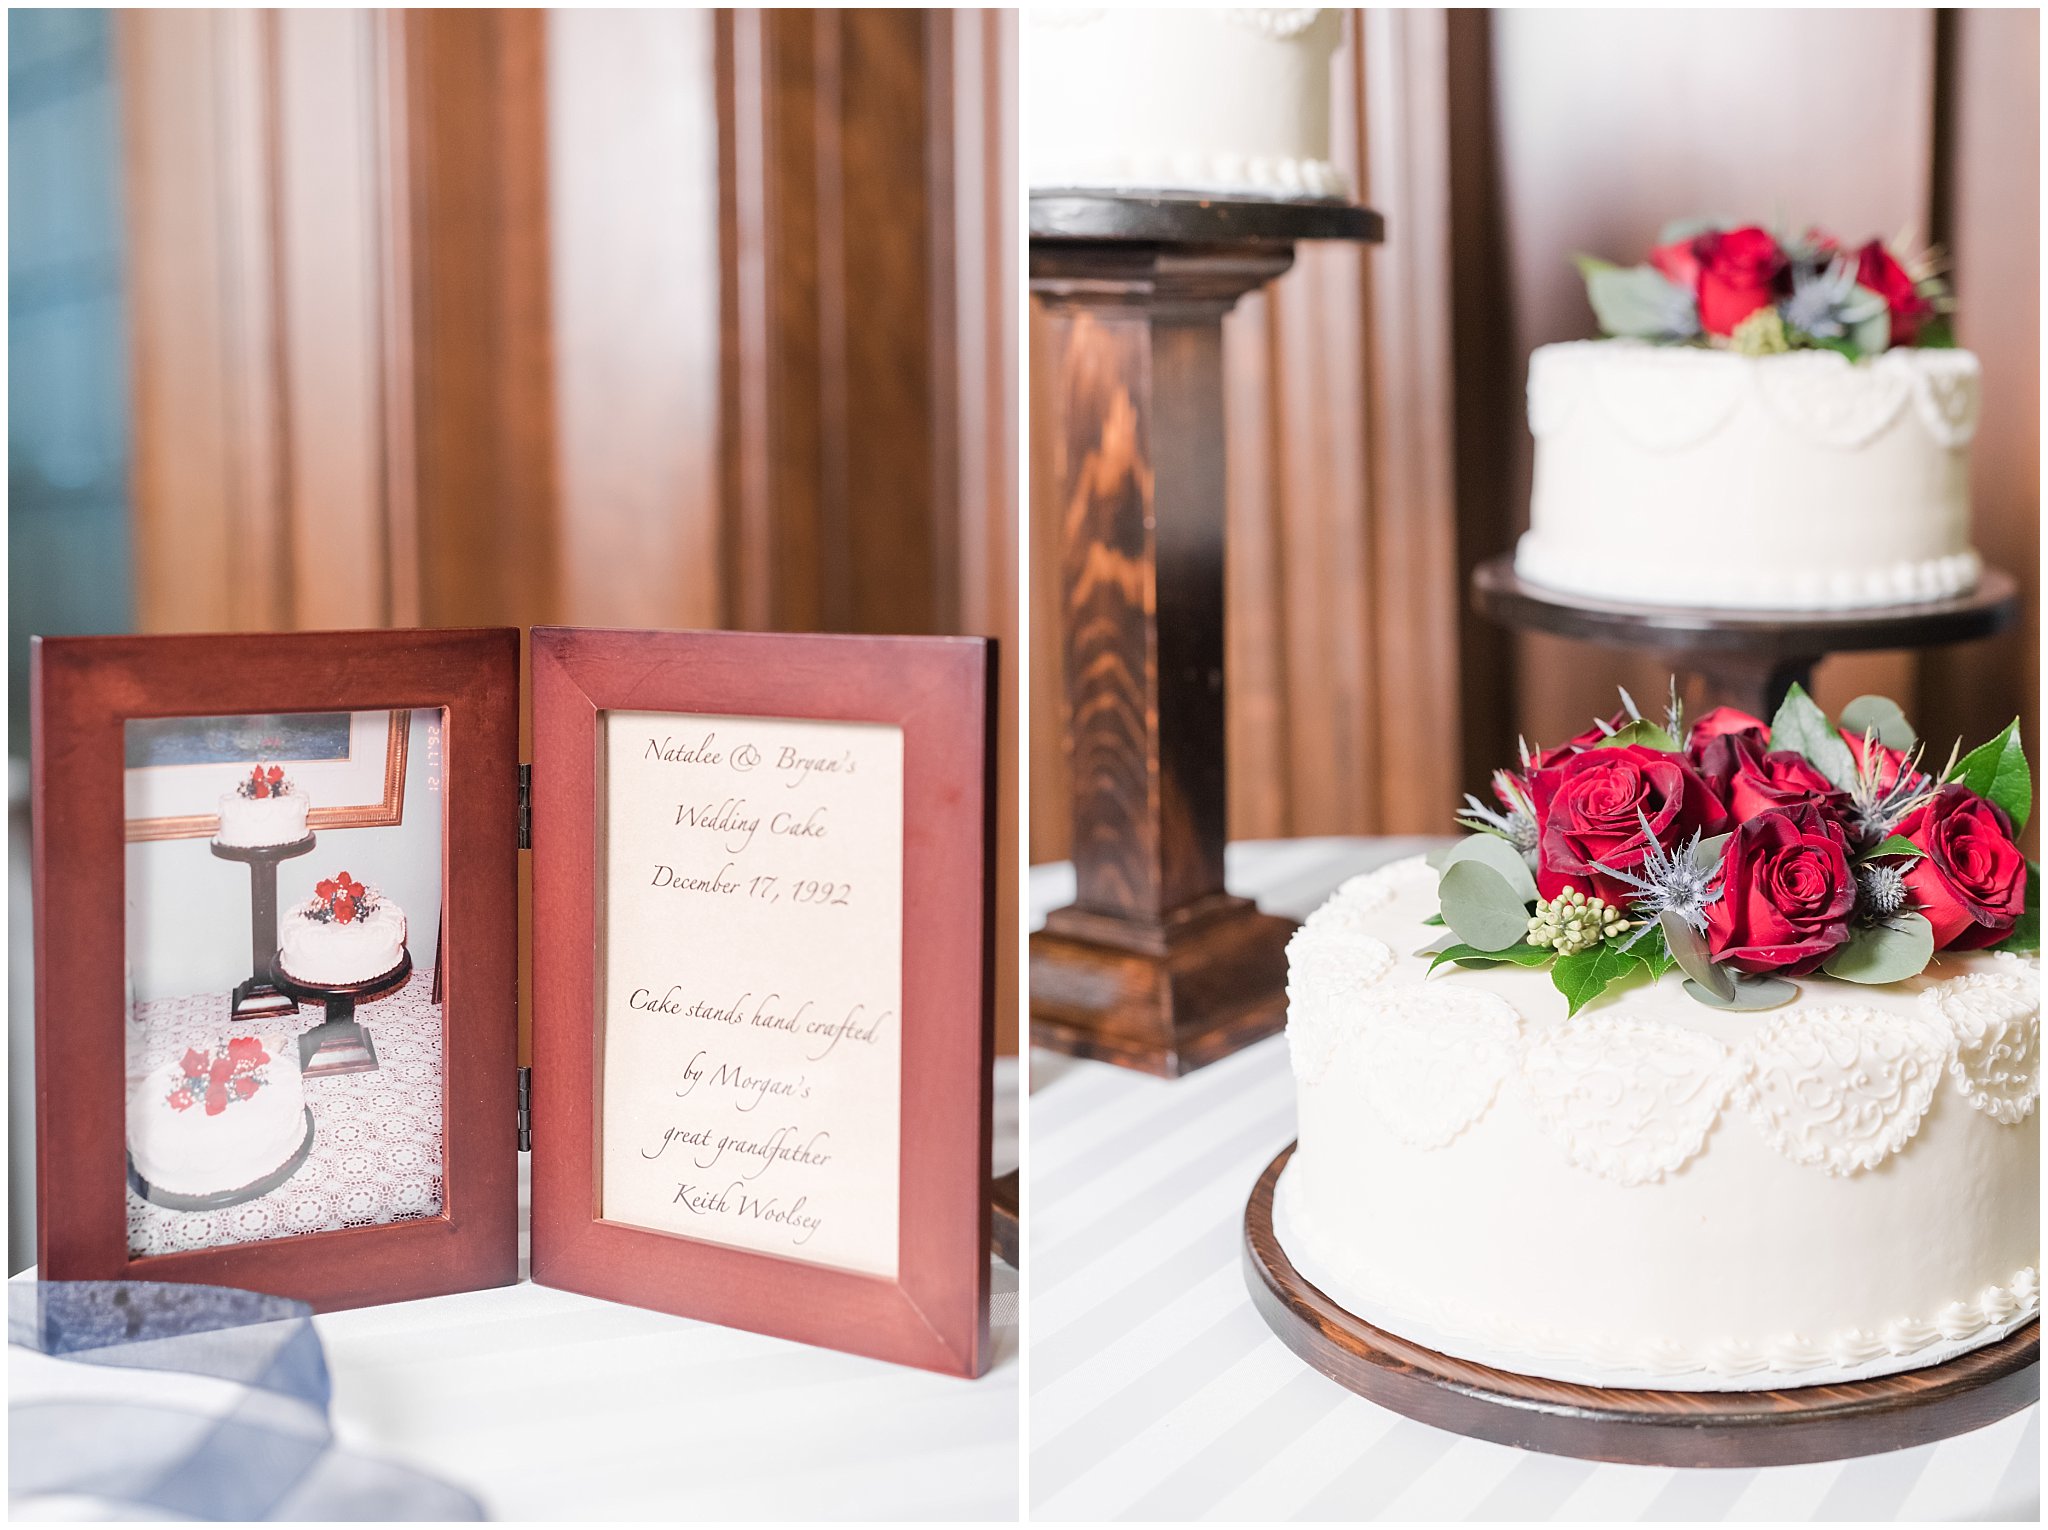 Vintage wedding cake with three tiers at Joseph Smith Memorial Building | navy and burgundy colors | Bountiful Temple Wedding and Joseph Smith Memorial Reception | Jessie and Dallin Photography